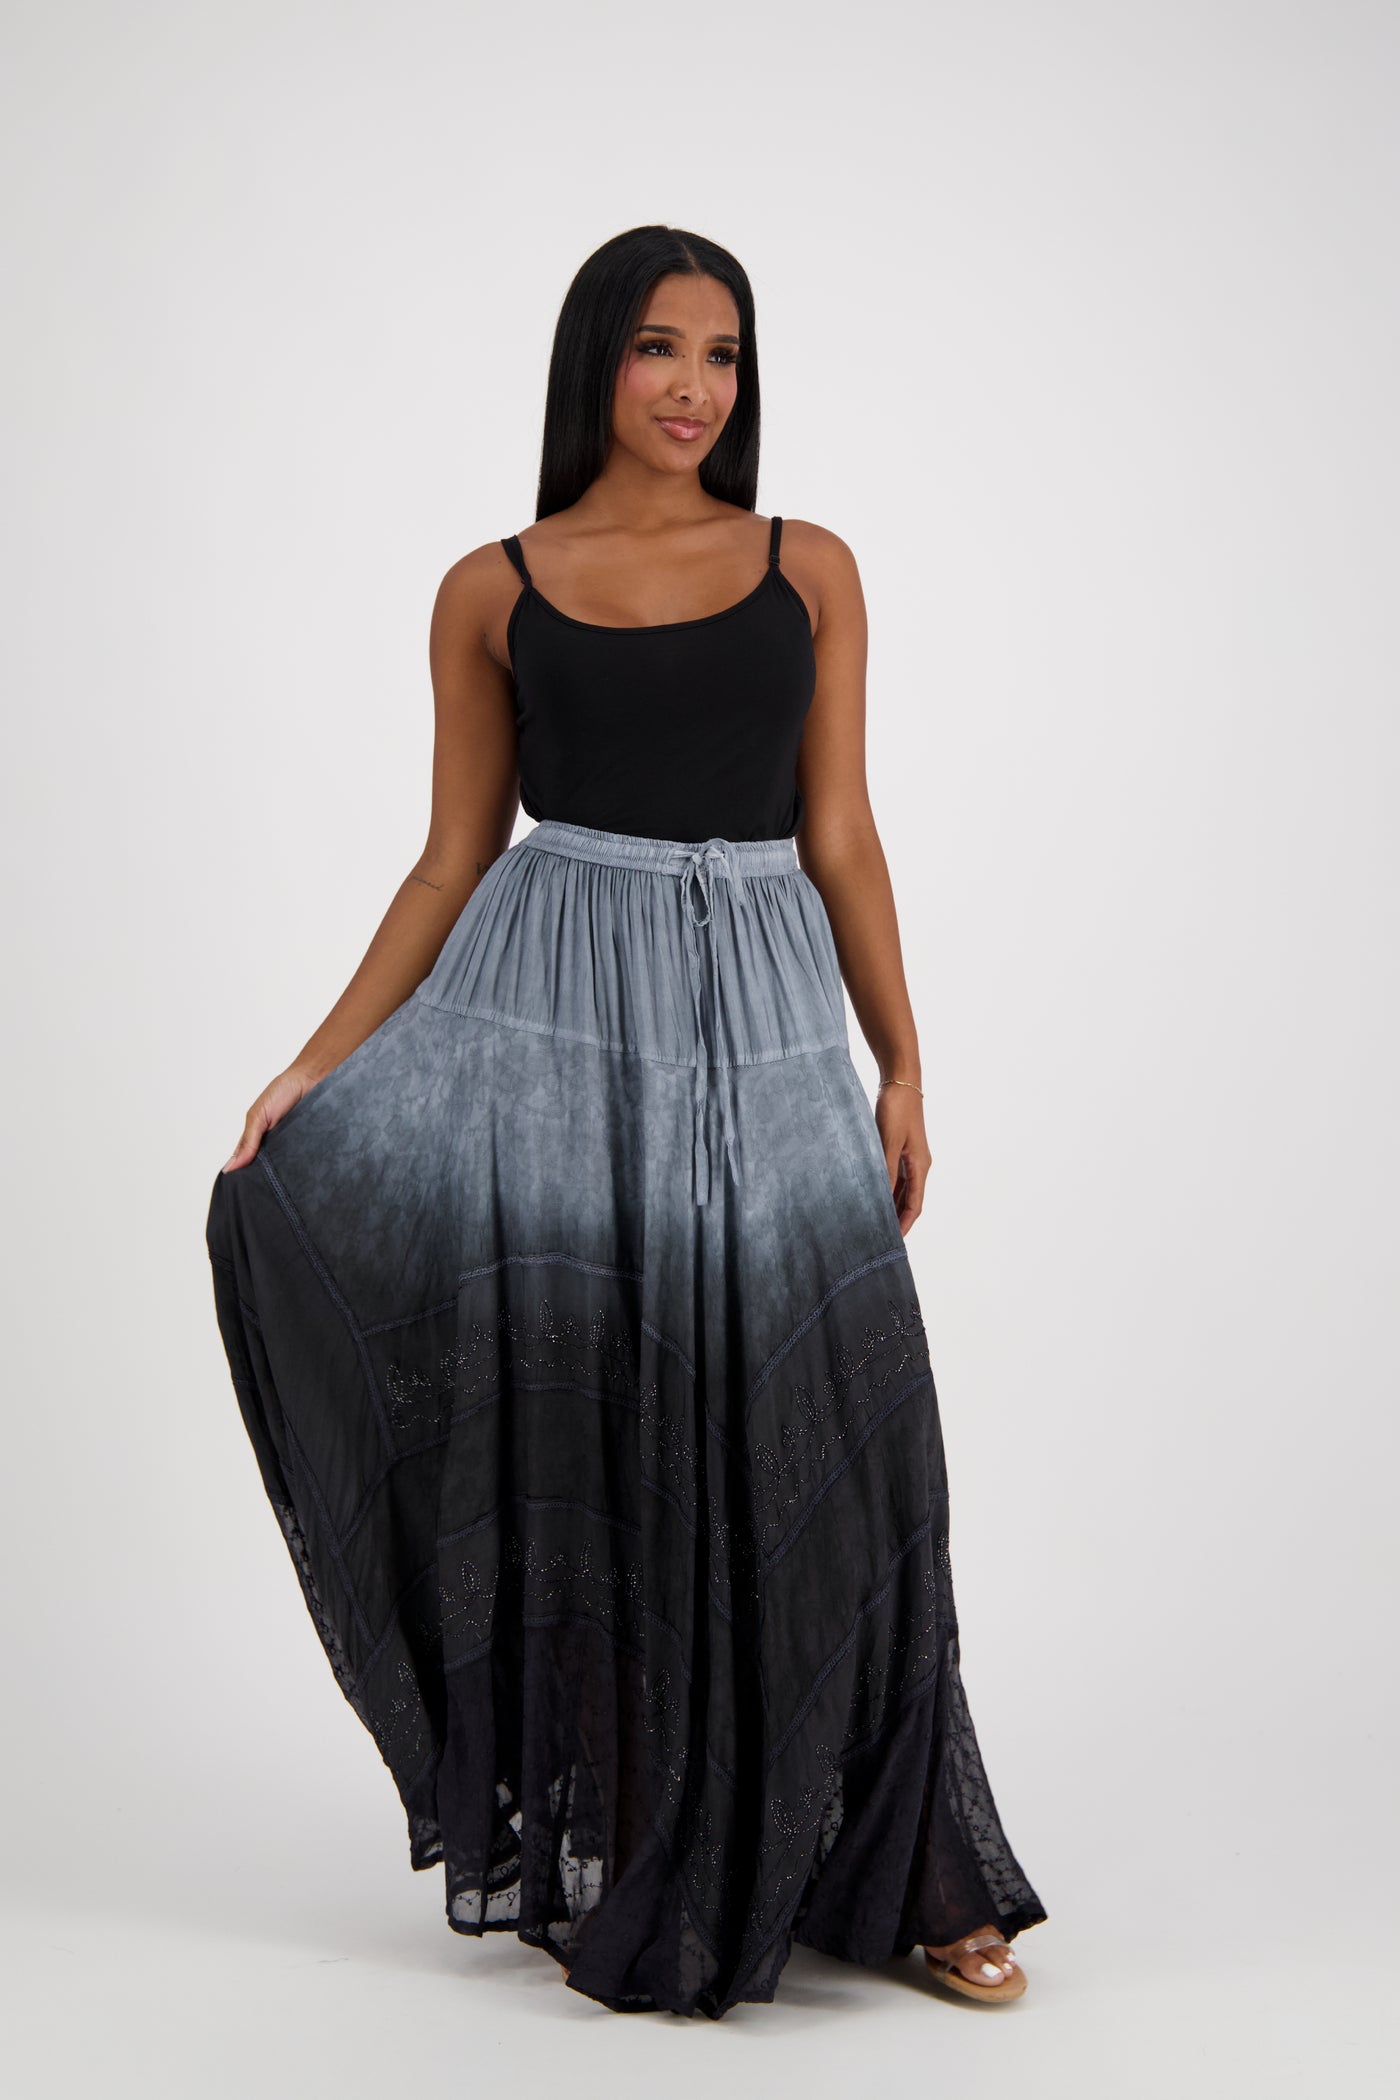 Ombre Acid Wash Skirt One Size 6 Colors 13228